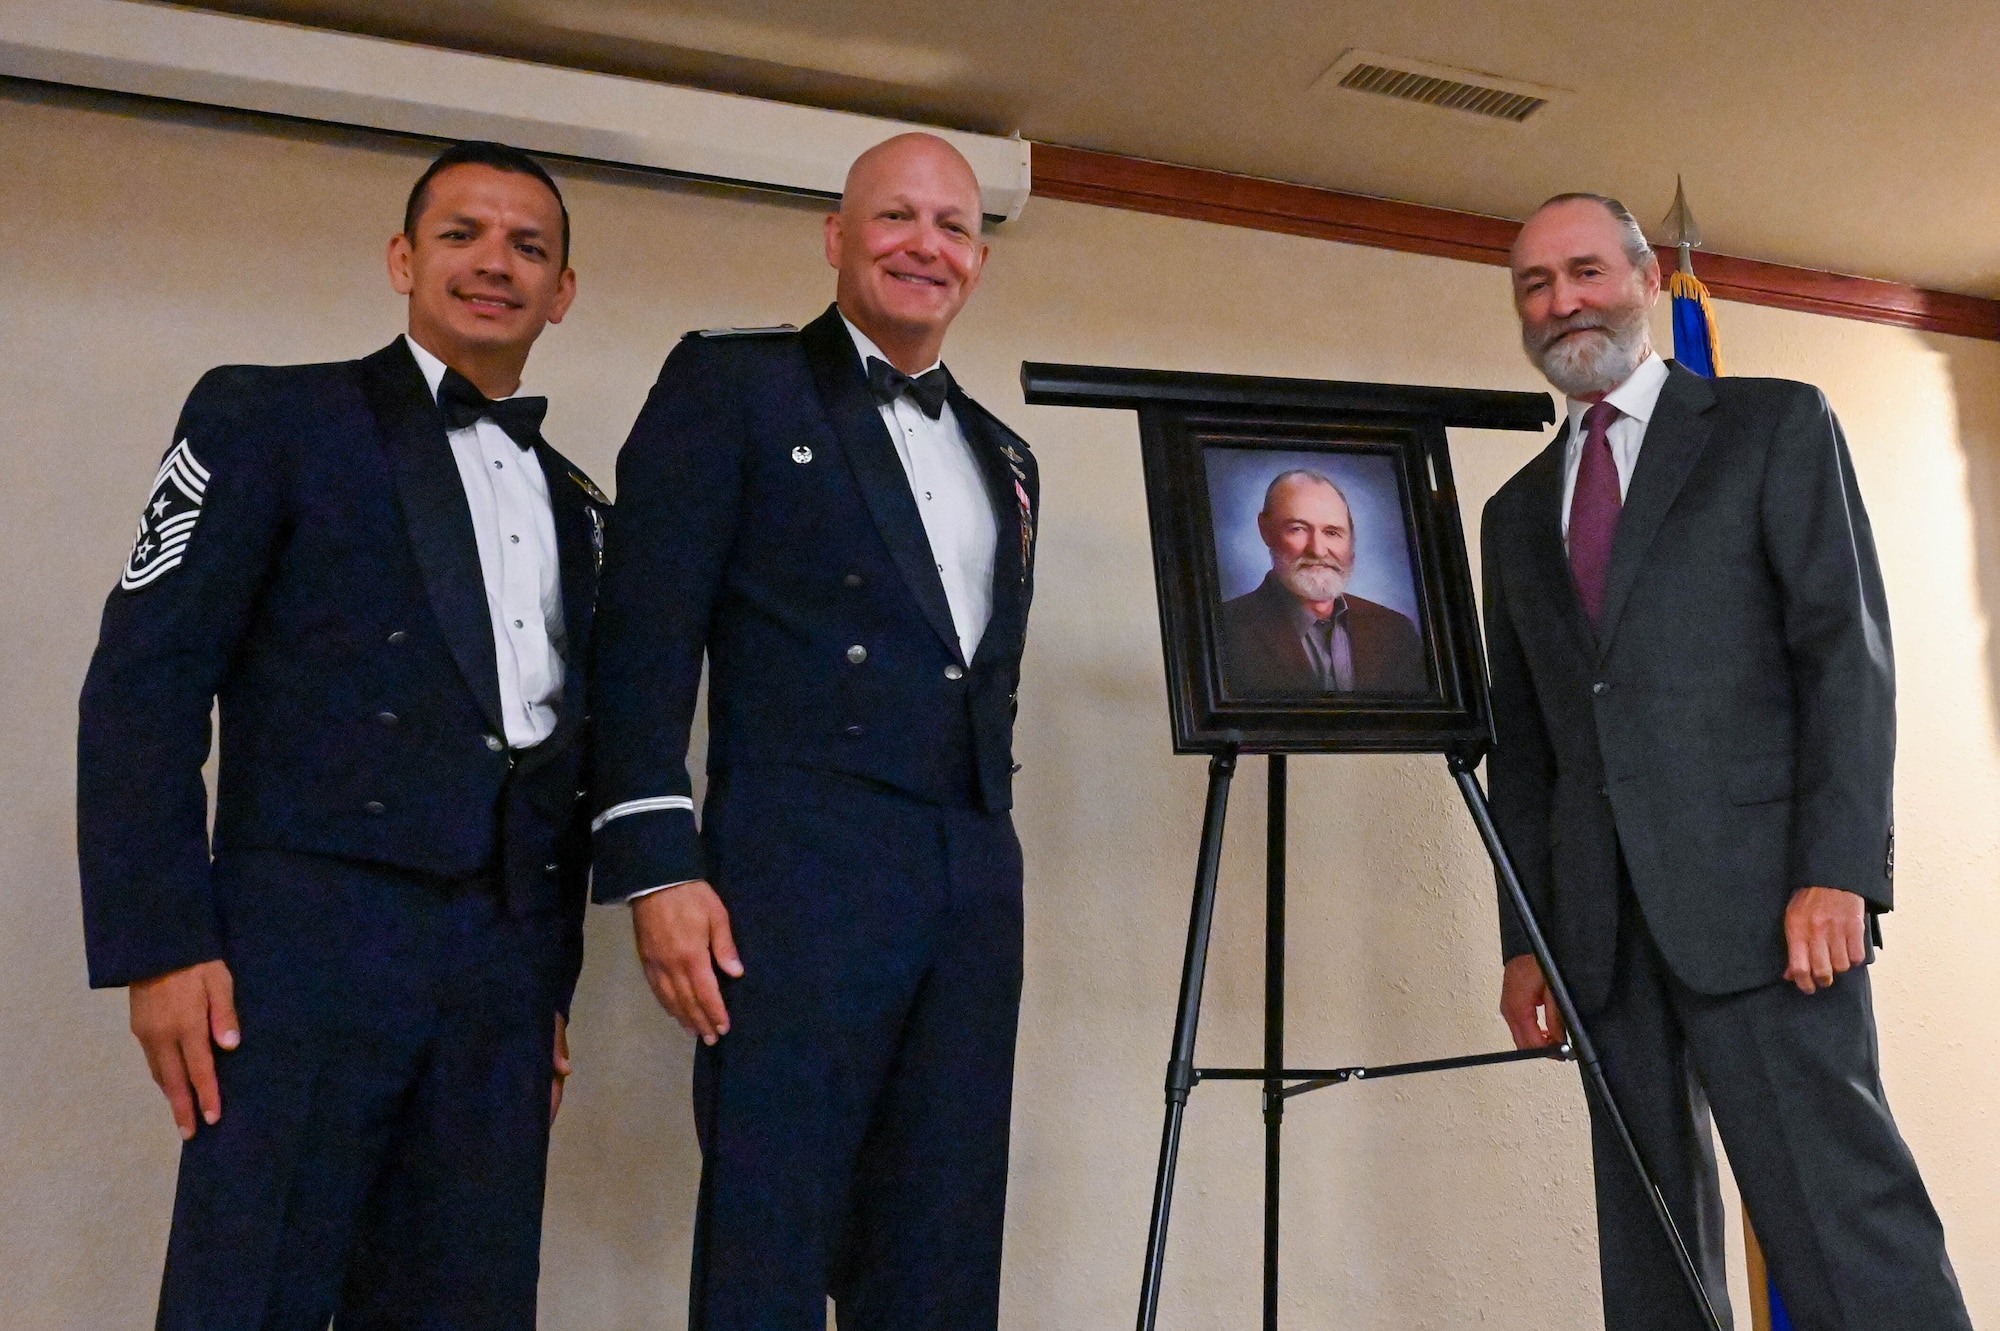 U.S. Air Force Col. Blaine Baker, 97th Air Mobility Wing commander (center) and Chief Master Sgt. Cesar Flores, 97th Air Mobility Wing command chief (left), pose for a photo with Tom Buchanan, general manager of the Altus-Lugert Irrigation District (right), during the Friends of Altus induction at Altus Air Force Base, Oklahoma July 11, 2023. Buchanan was honored as an outstanding civic leader for his contributions to the Altus community. (U.S. Air Force photo by Airman 1st Class Heidi Bucins)